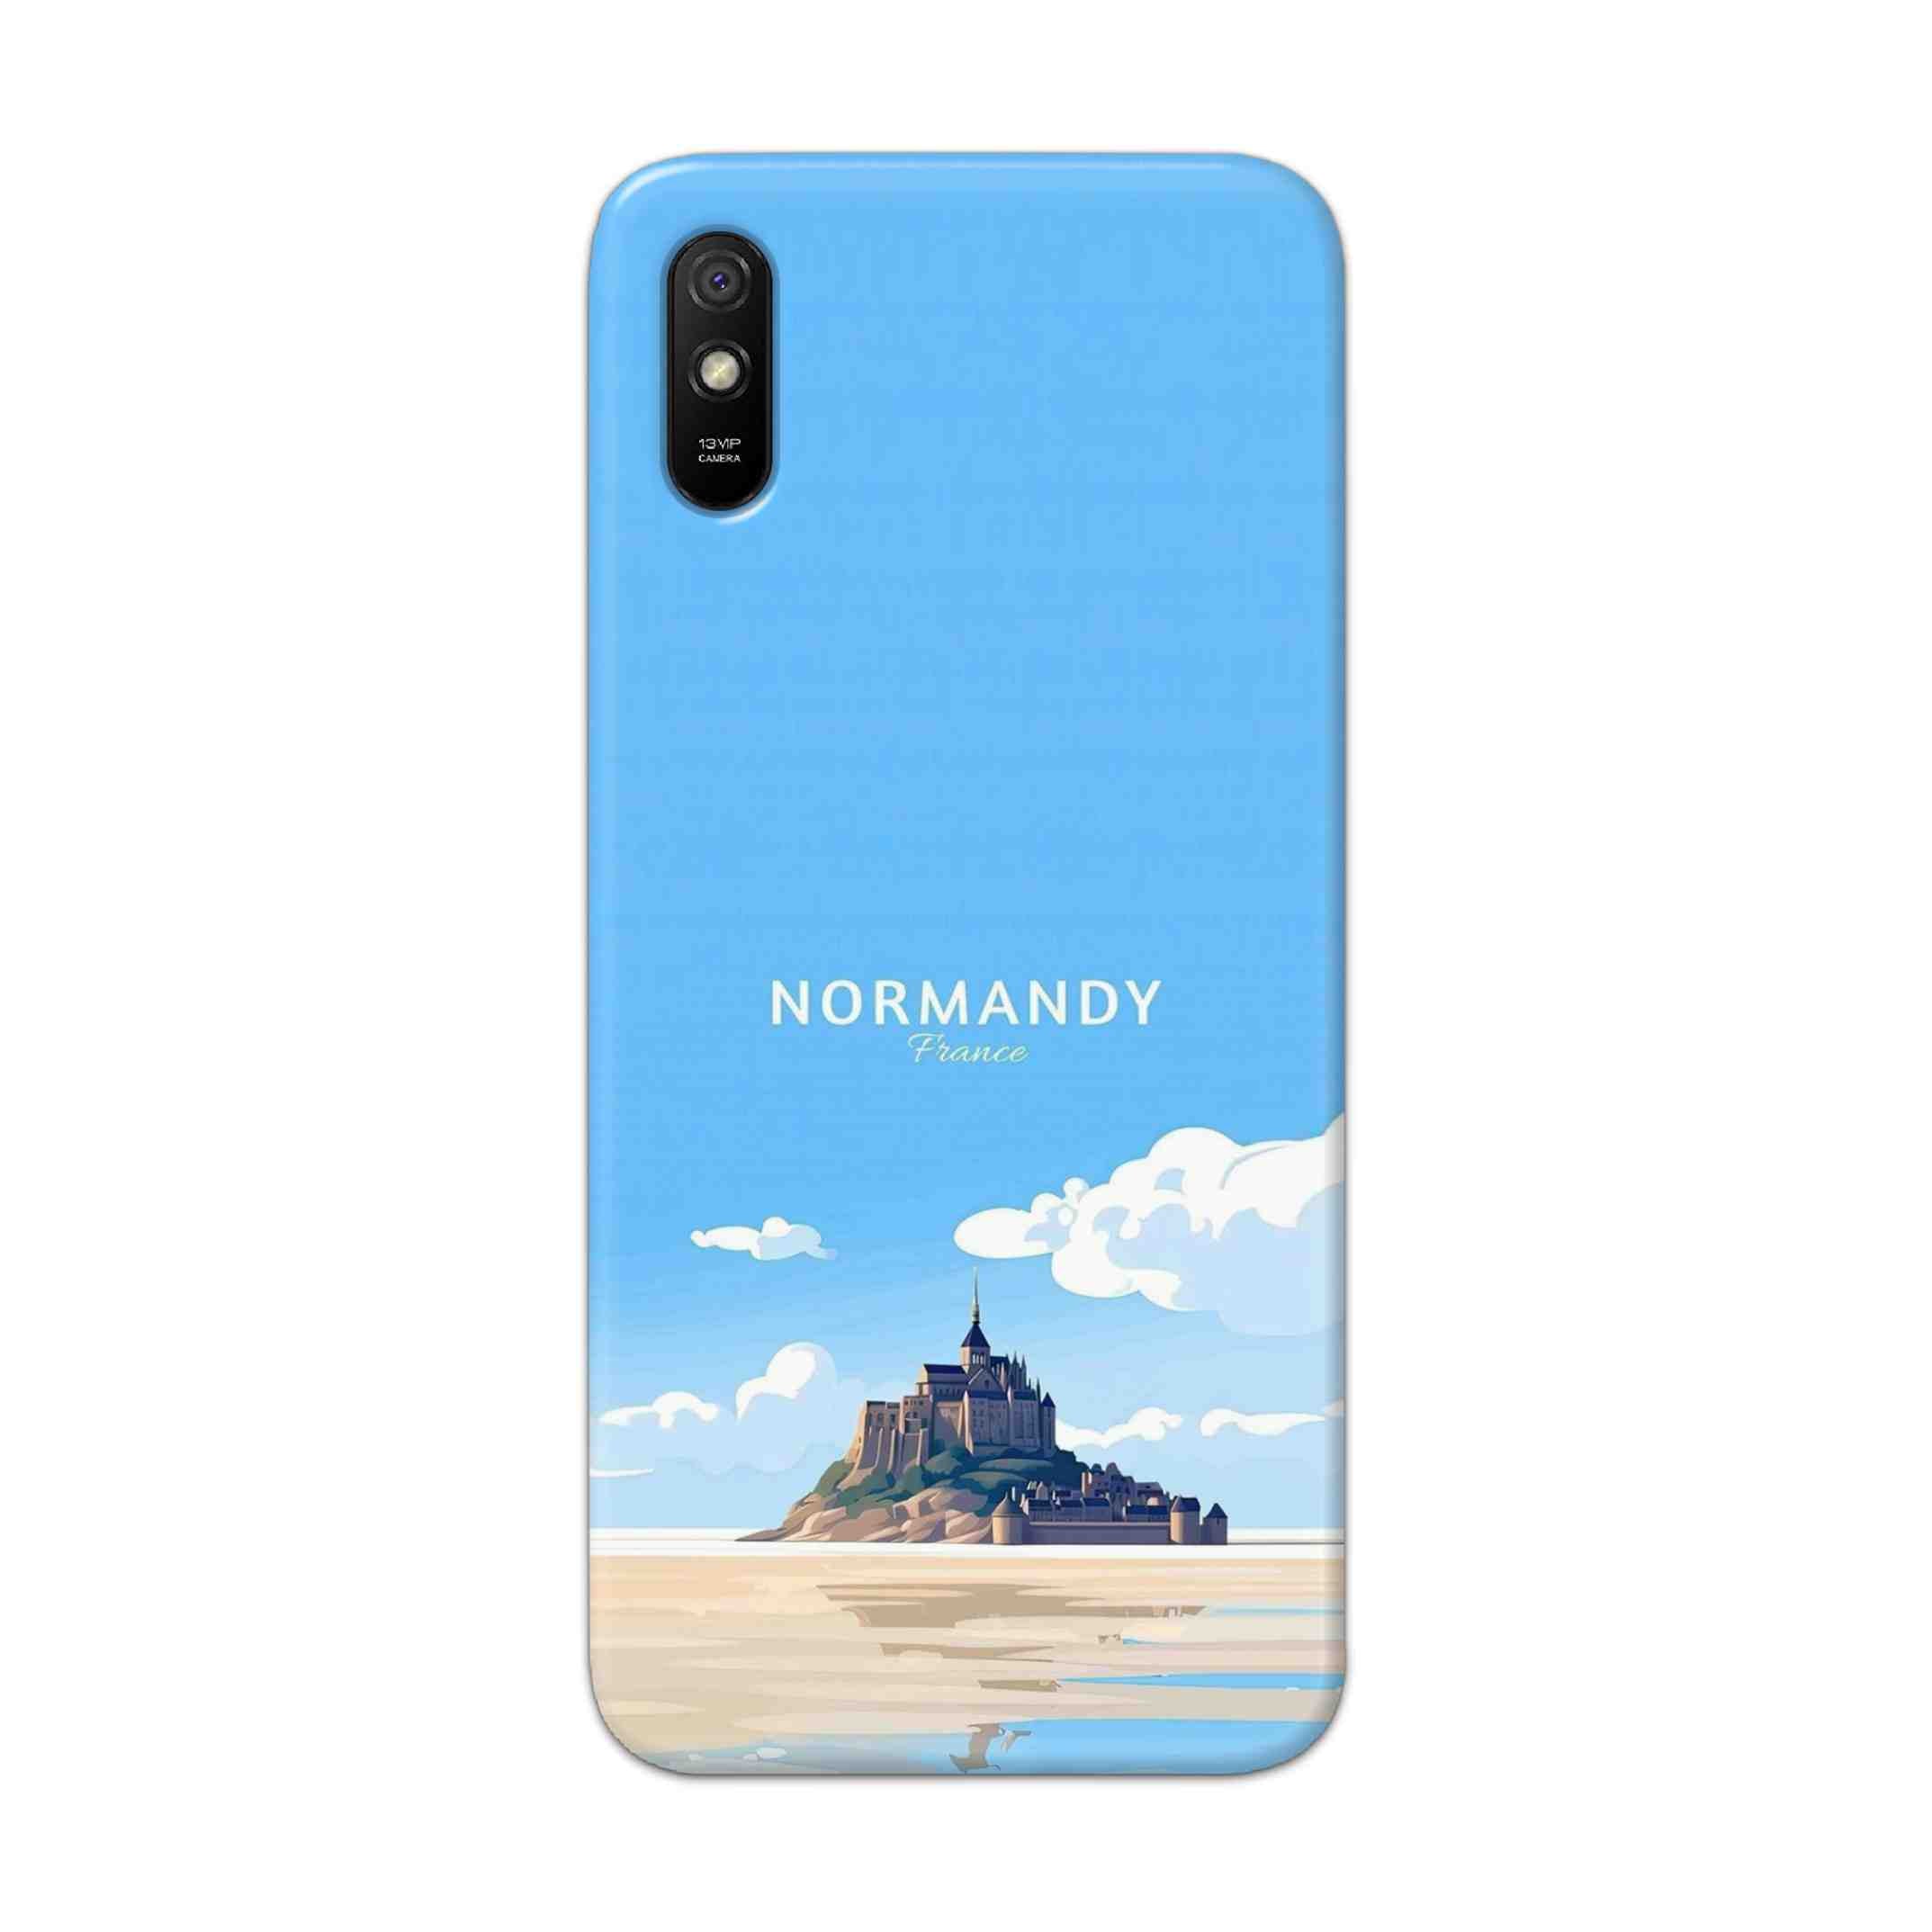 Buy Normandy Hard Back Mobile Phone Case Cover For Redmi 9A Online